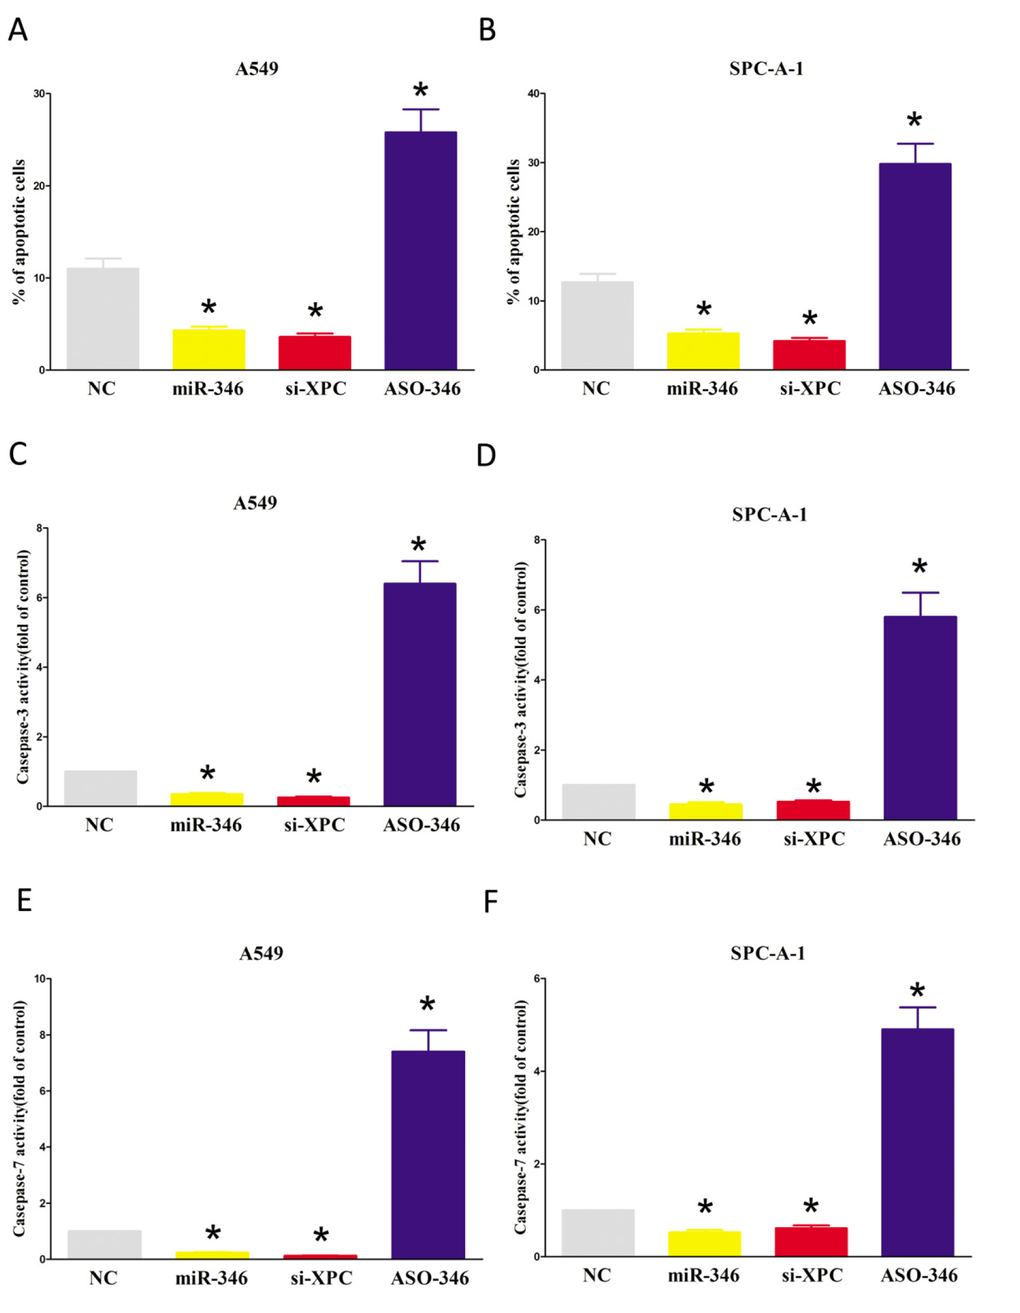 Ectopic expression of miR-346 suppresses apoptosis in A549 and SPC-A-1 cells. (A-B) Shown are statistical analysis of flow cytometric analysis. (C-E) Quantitative representation of caspase-3 and caspase-7 activity in A549 and SPC-A-1 cells transfected with NC, miR-346, si-XPC and ASO-346 for forty eight hours. Assays were performed in triplicate. *P 